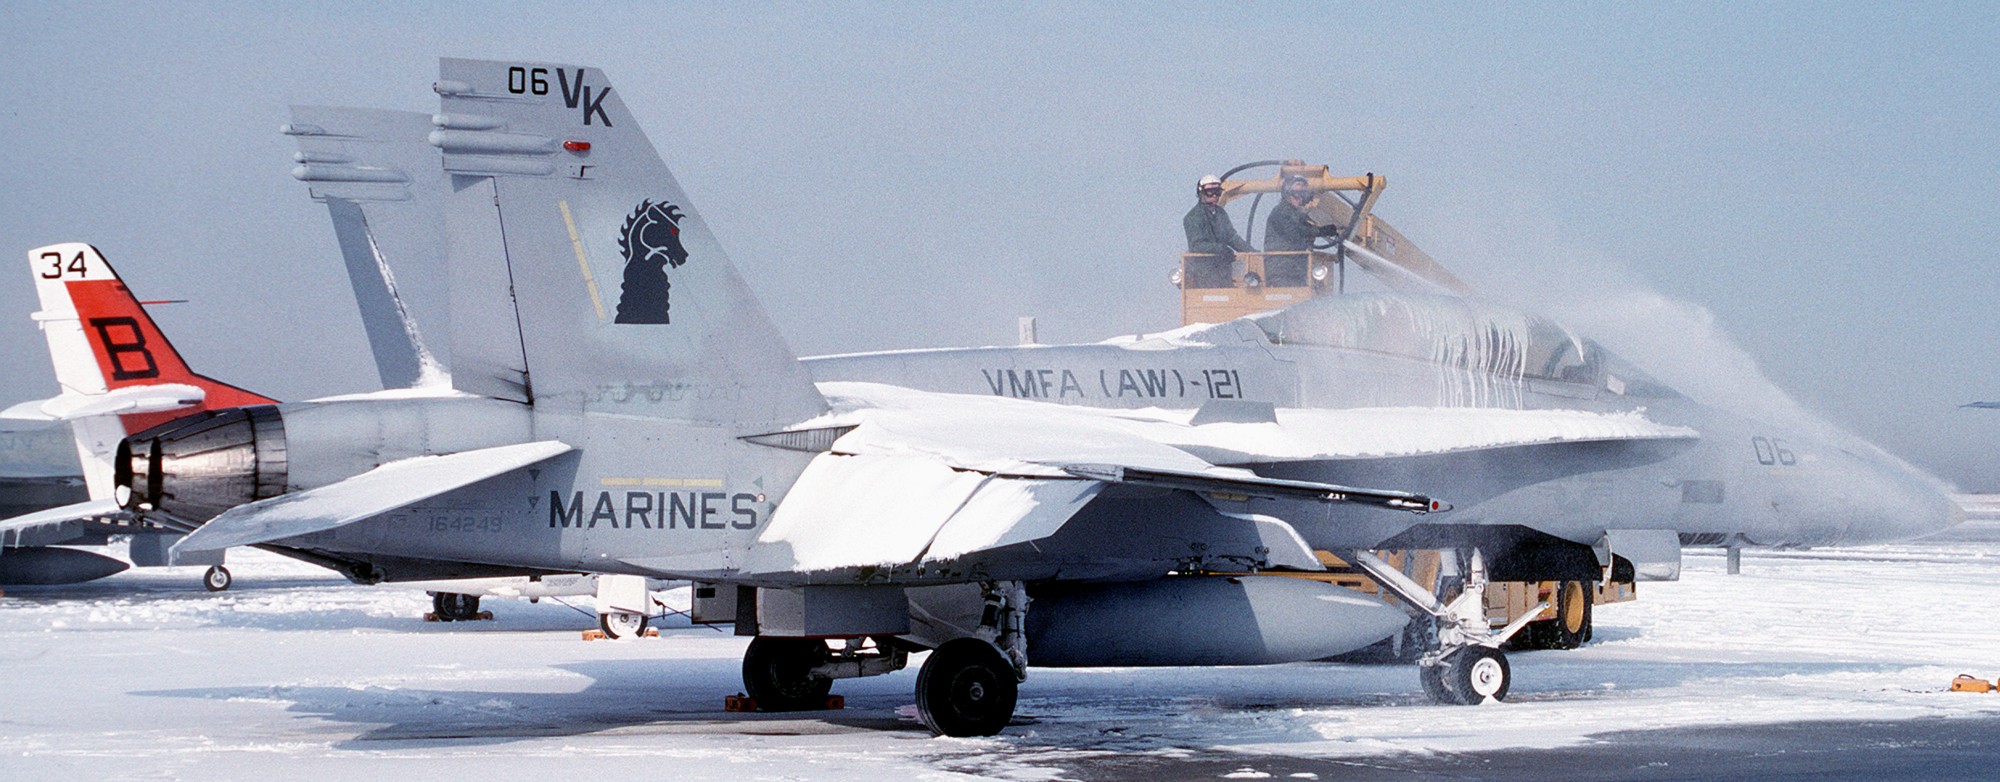 vmfa(aw)-121 green knights marine fighter attack squadron f/a-18d hornet 15